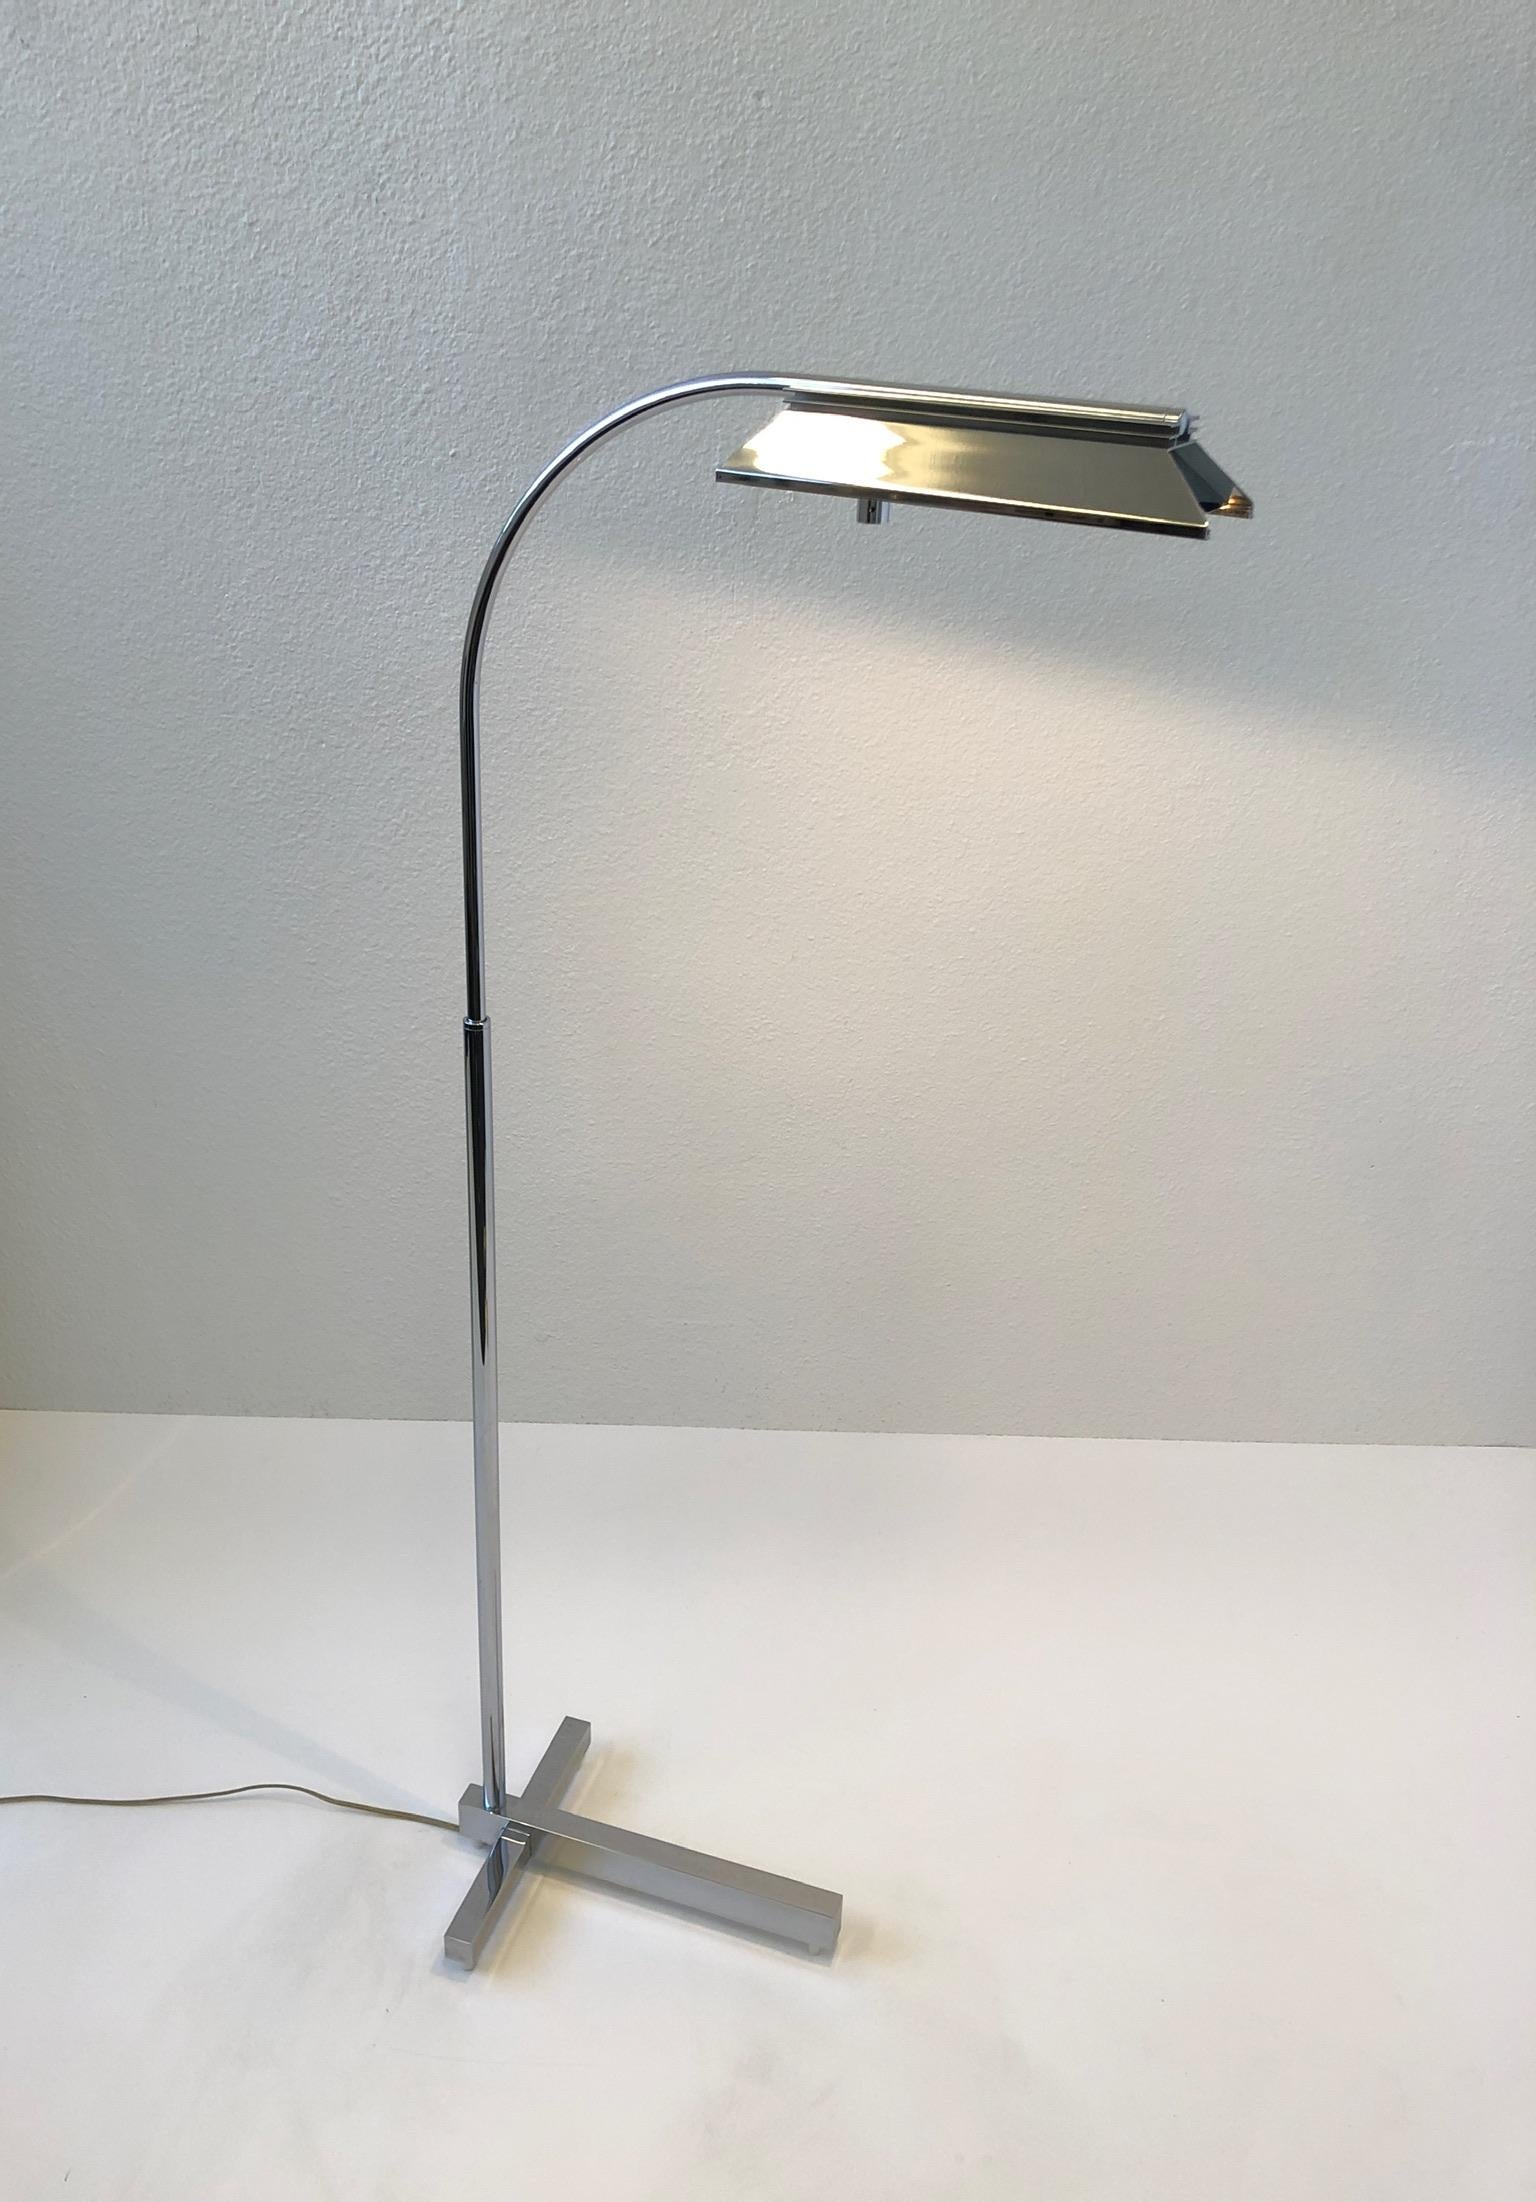 1970’s adjustable polish chrome floor lamp design by Casella. 
Can be rotated 360* and can be lower down to 39.25”or extend up to 54.25” high. 
It has a full range dimmer built in the shade.